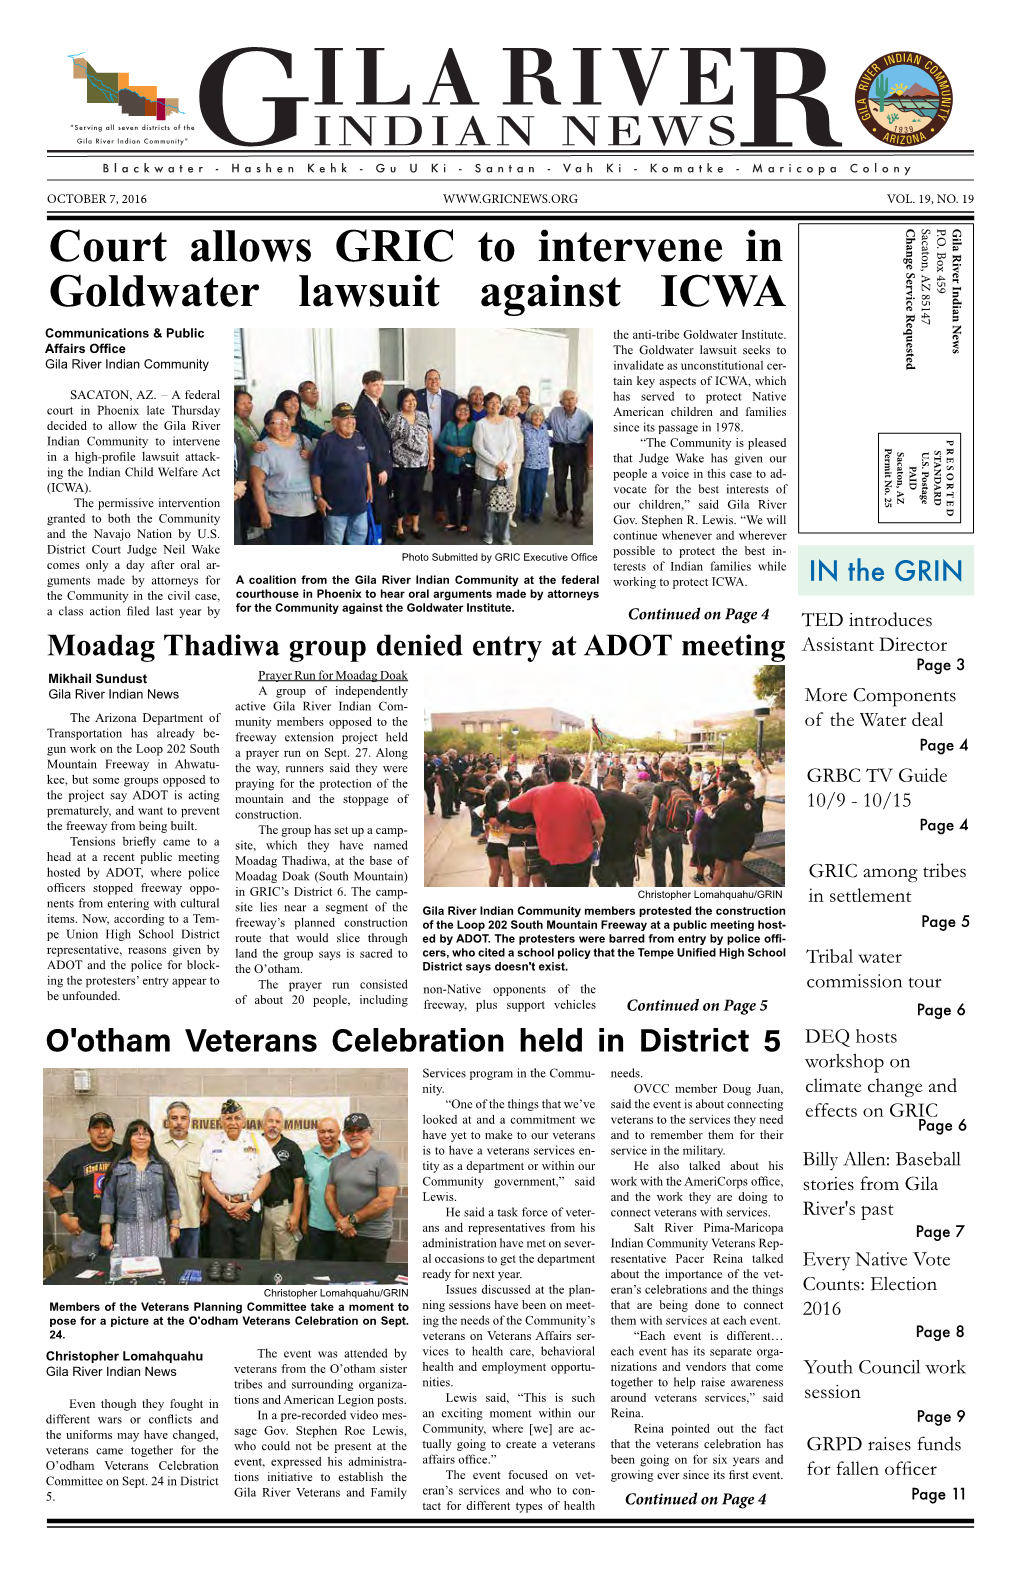 Court Allows GRIC to Intervene in Goldwater Lawsuit Against ICWA Communications & Public the Anti-Tribe Goldwater Institute